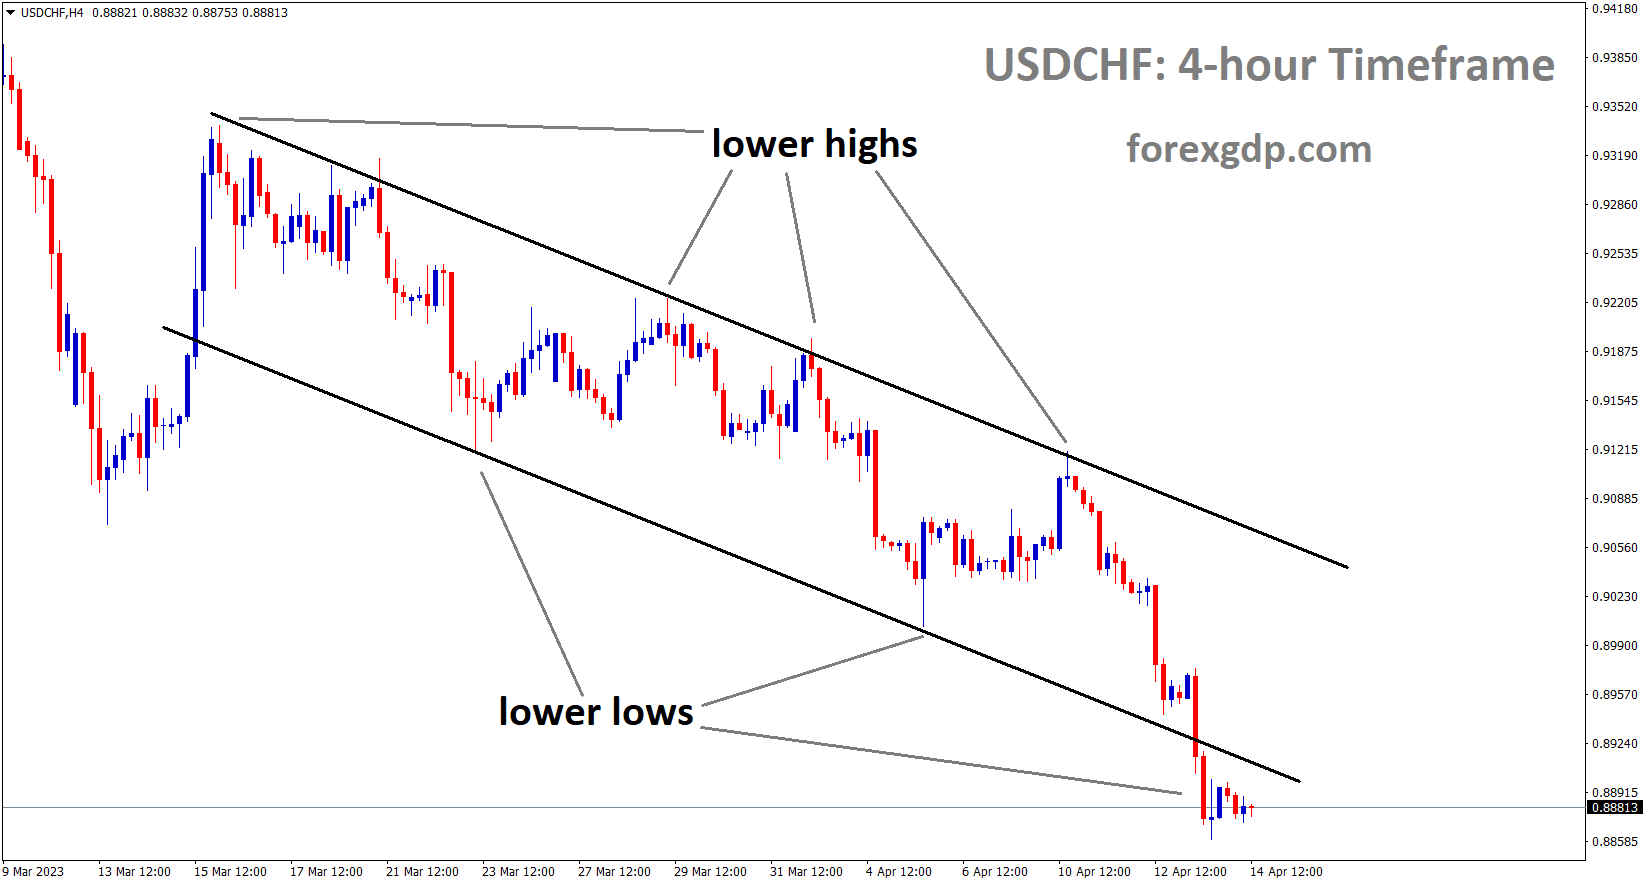 USDCHF is moving in the Descending channel and the market has reached the lower low area of the channel 1